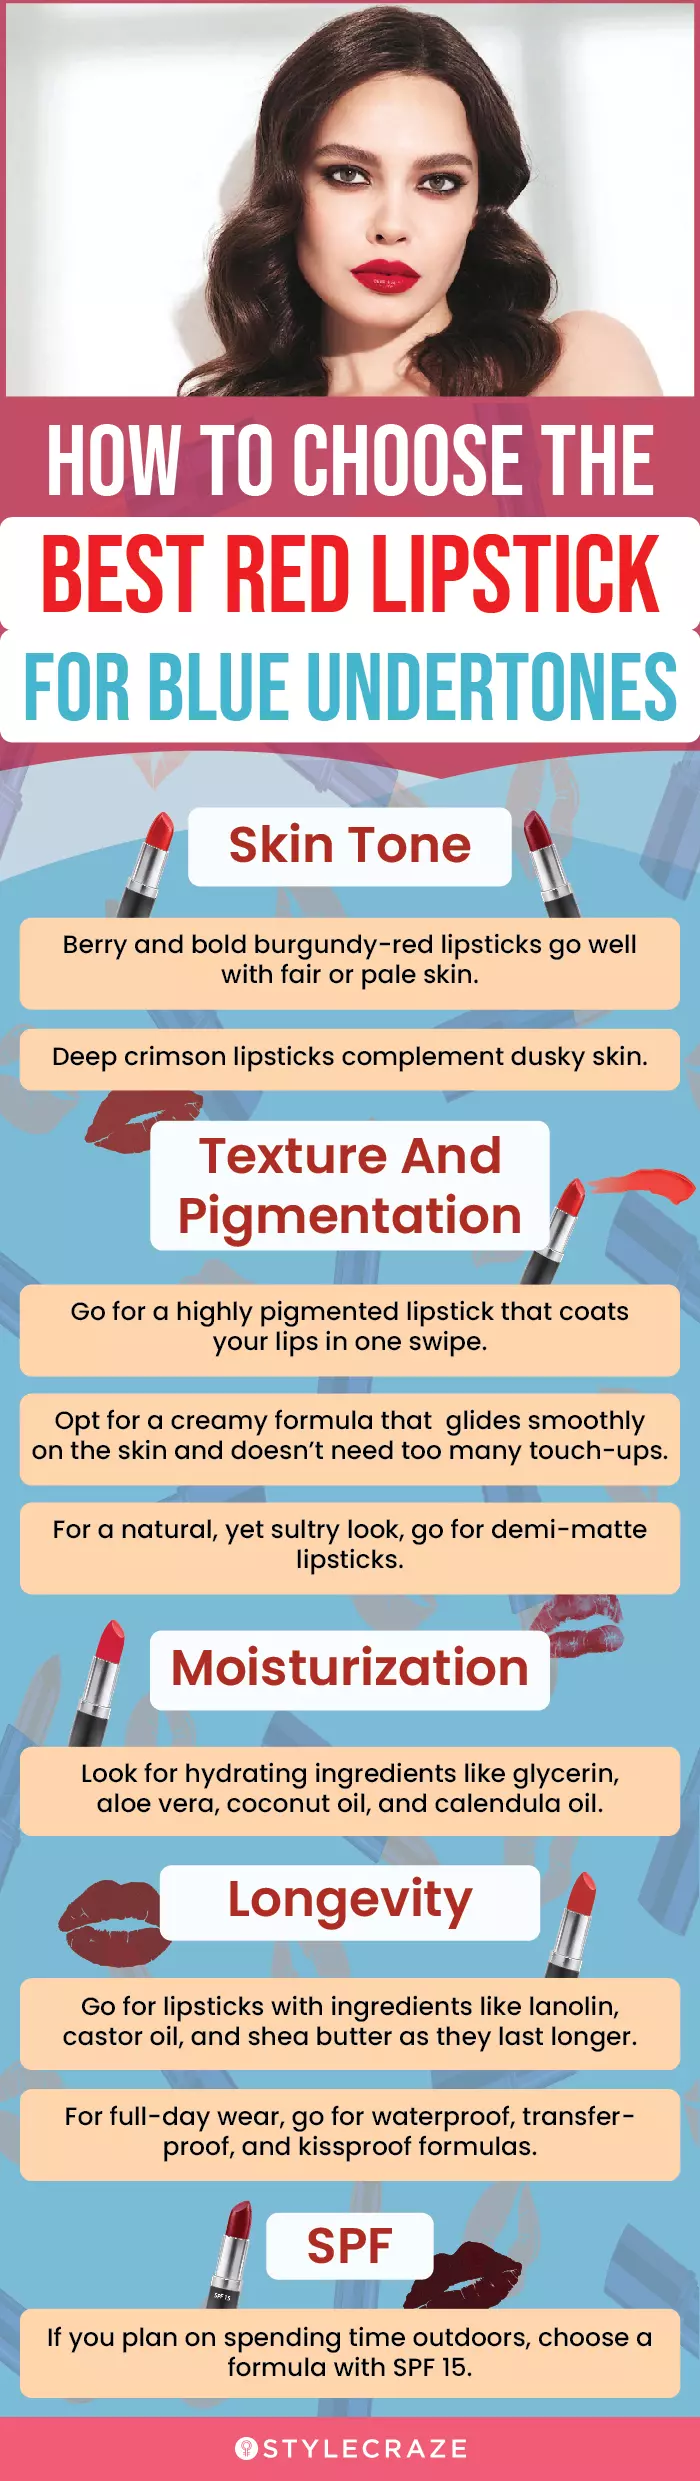 How To Choose The Best Red Lipstick For Blue Undertones (infographic)